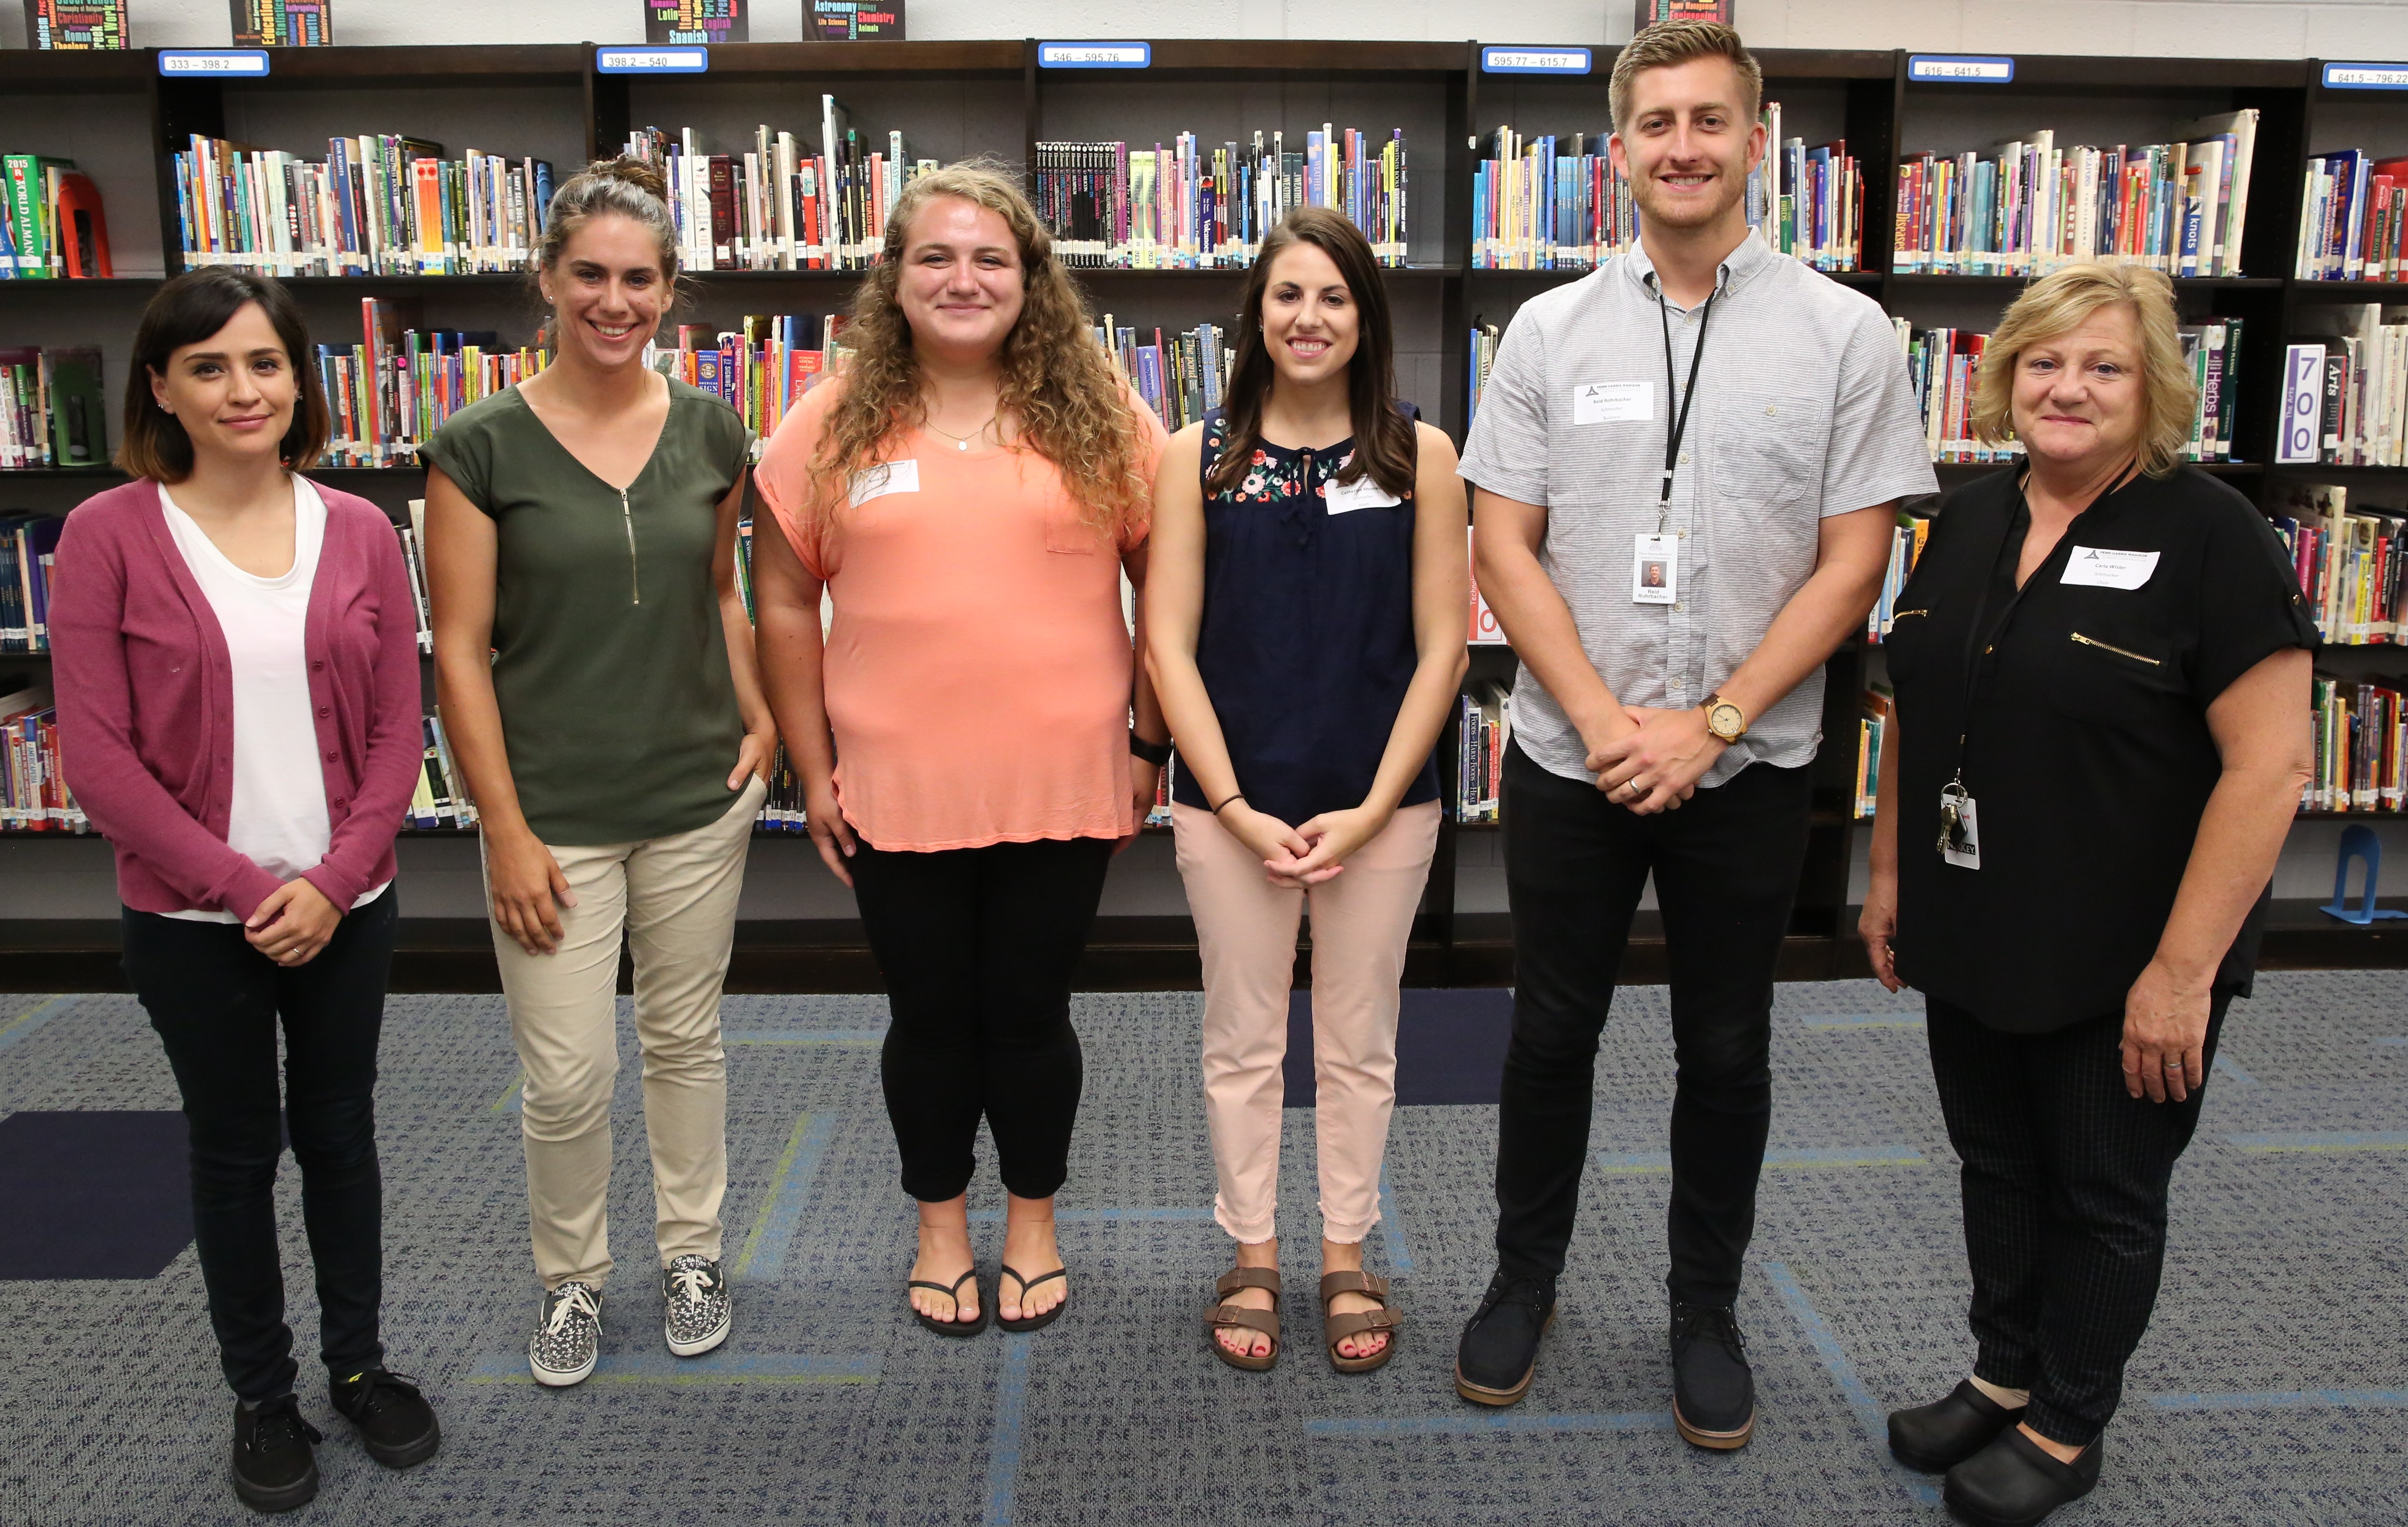 Danielle Cortez (Science), Kristen Hills (Band), Anna Irons (Math 8, Geometry, Algebra 2), Catherine Moxness (7th and 8th grade Math), Reid Rohrbacher (Business), Carla Wisler (6th and 7th grade Choir) (Not Pictured: Allison Chrise, Exceptional Education